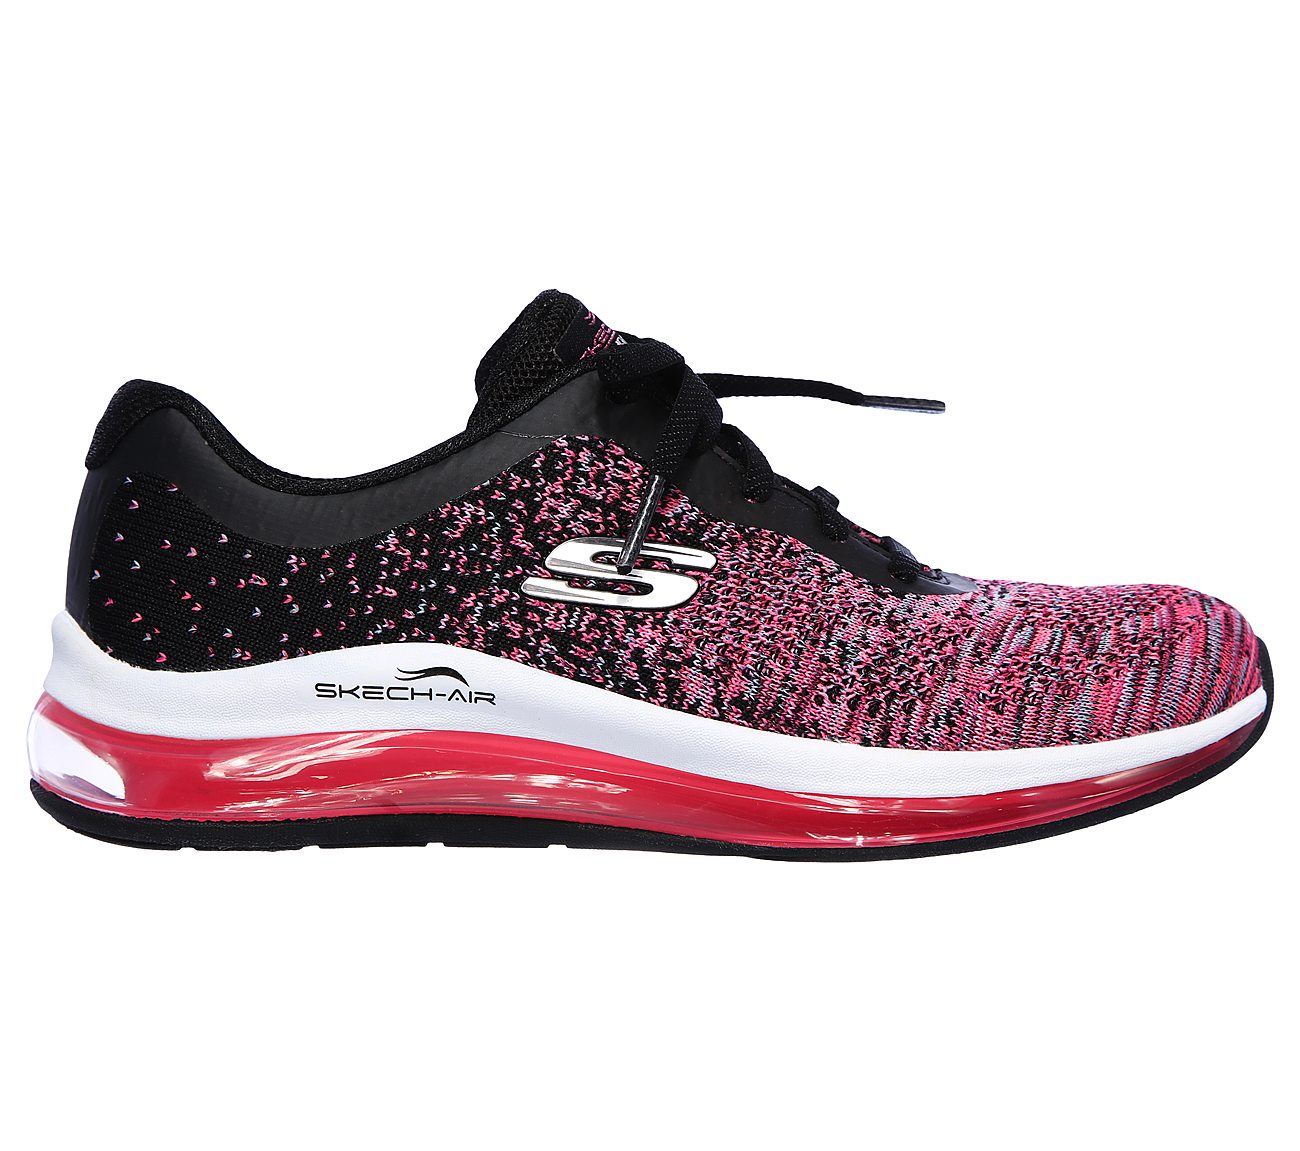 SKECH-AIR ELEMENT 2.0-DANCE T, BLACK/HOT PINK Footwear Right View